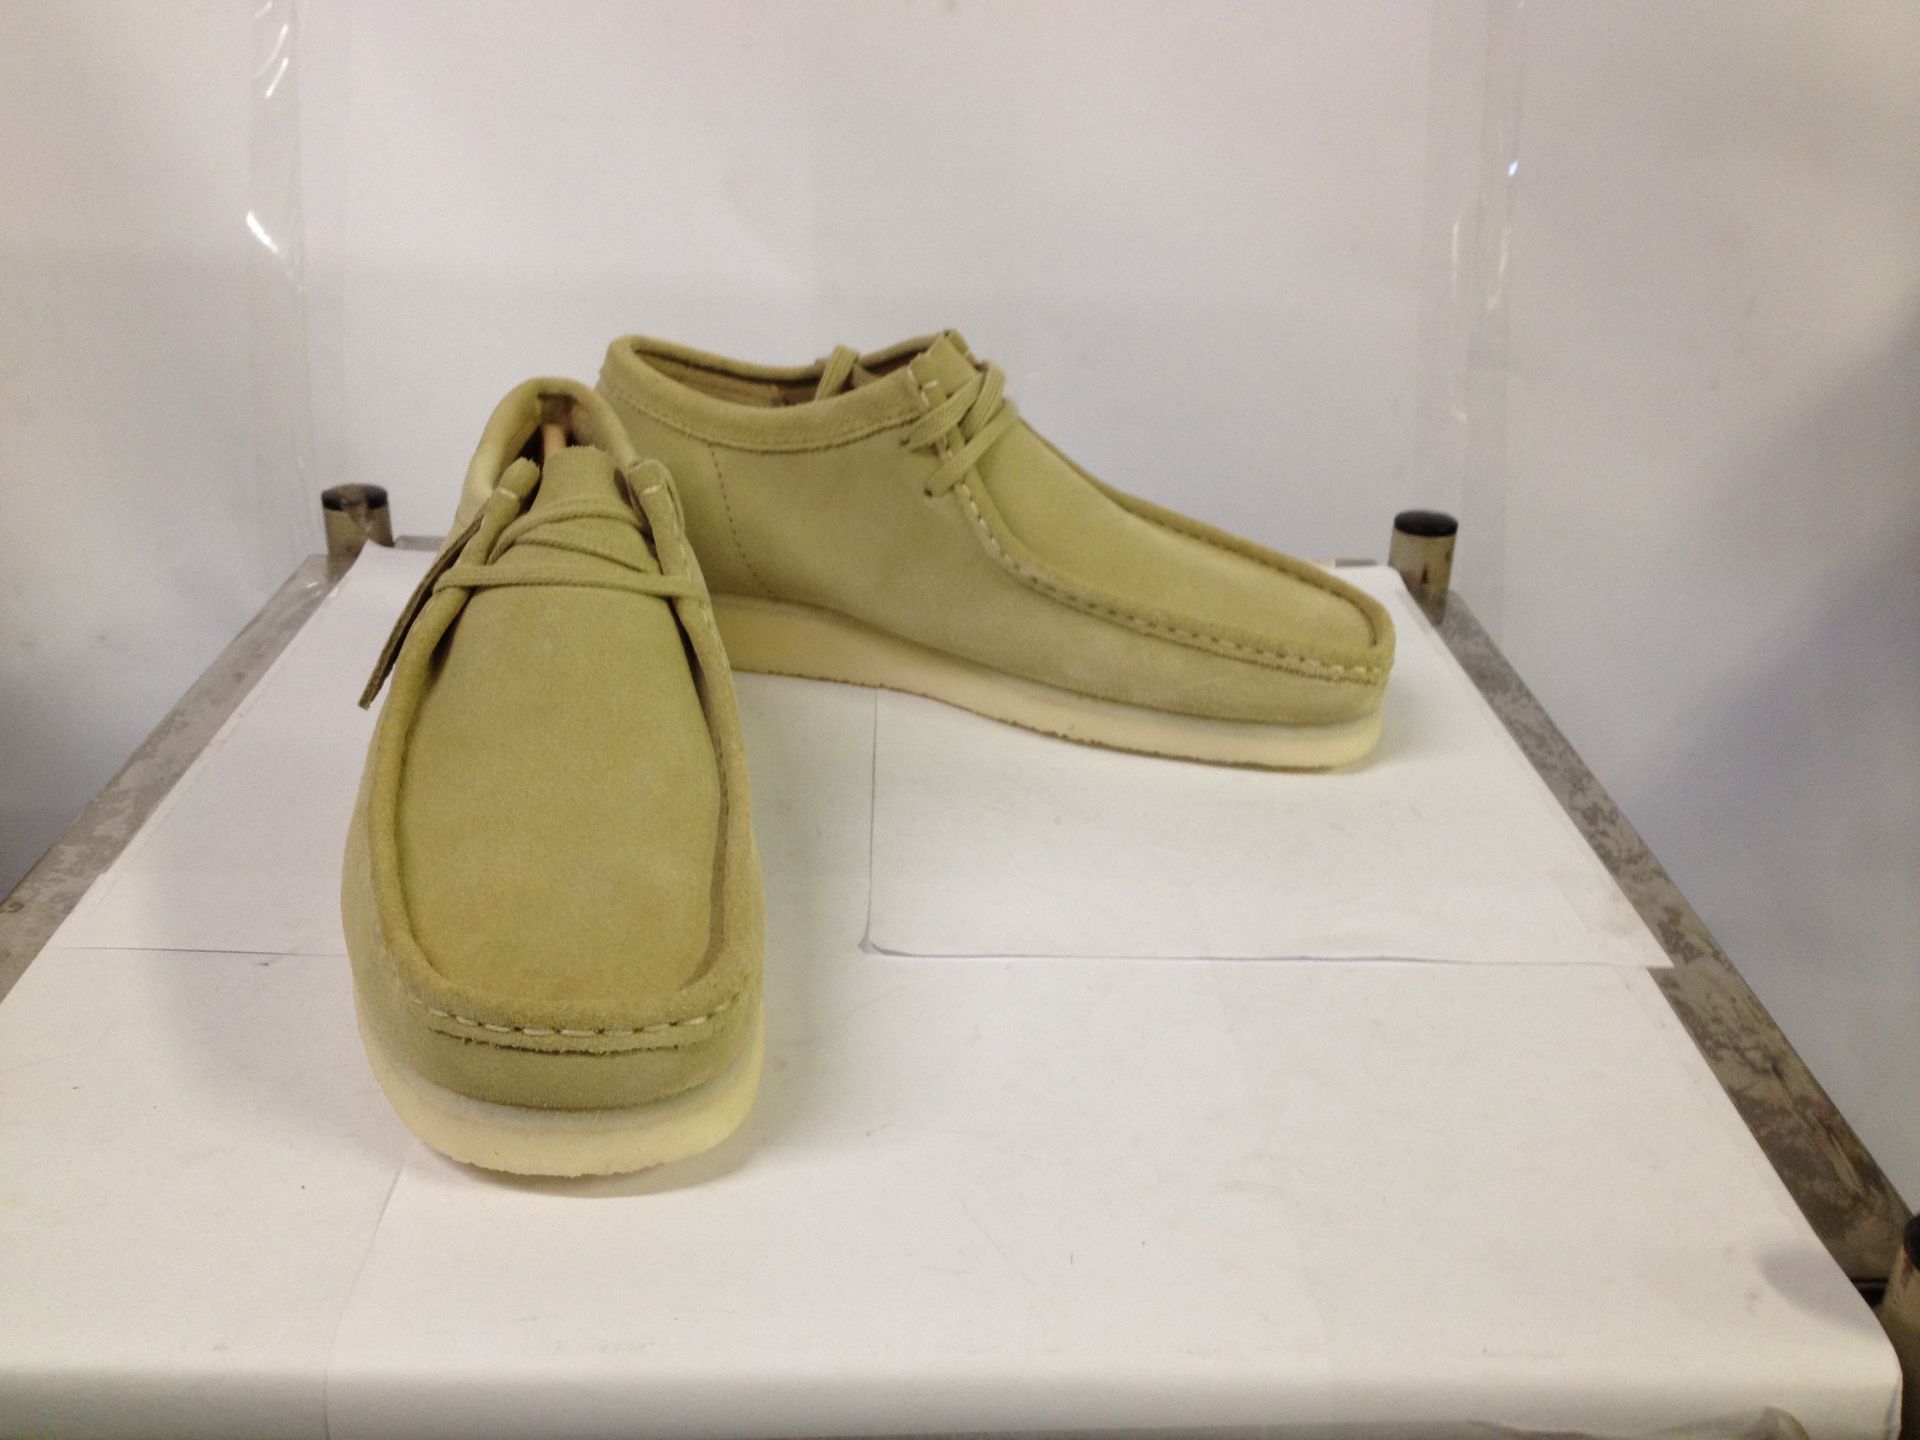 1 x Clarks Originals Shoes | Wallabee | Colour: Maple Suede | UK Size: 9 | RRP £ 11O - Image 2 of 2